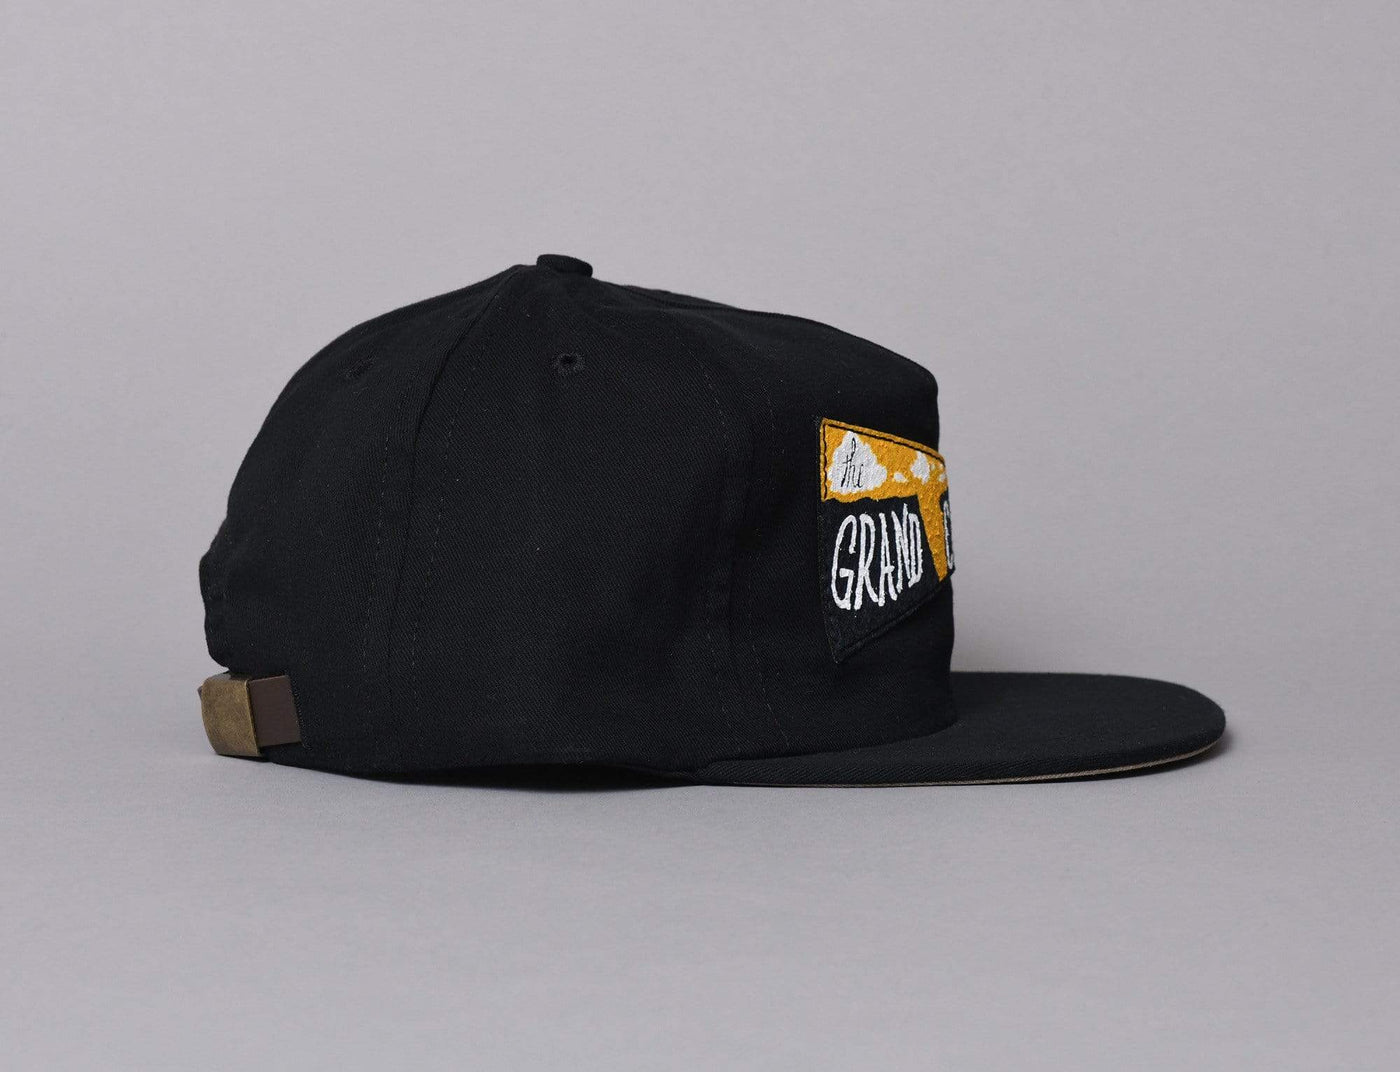 Cap Adjustable The Ampal Creative Grand Canyon Pennant Black The Ampal Creative Adjustable Cap / Black / One Size